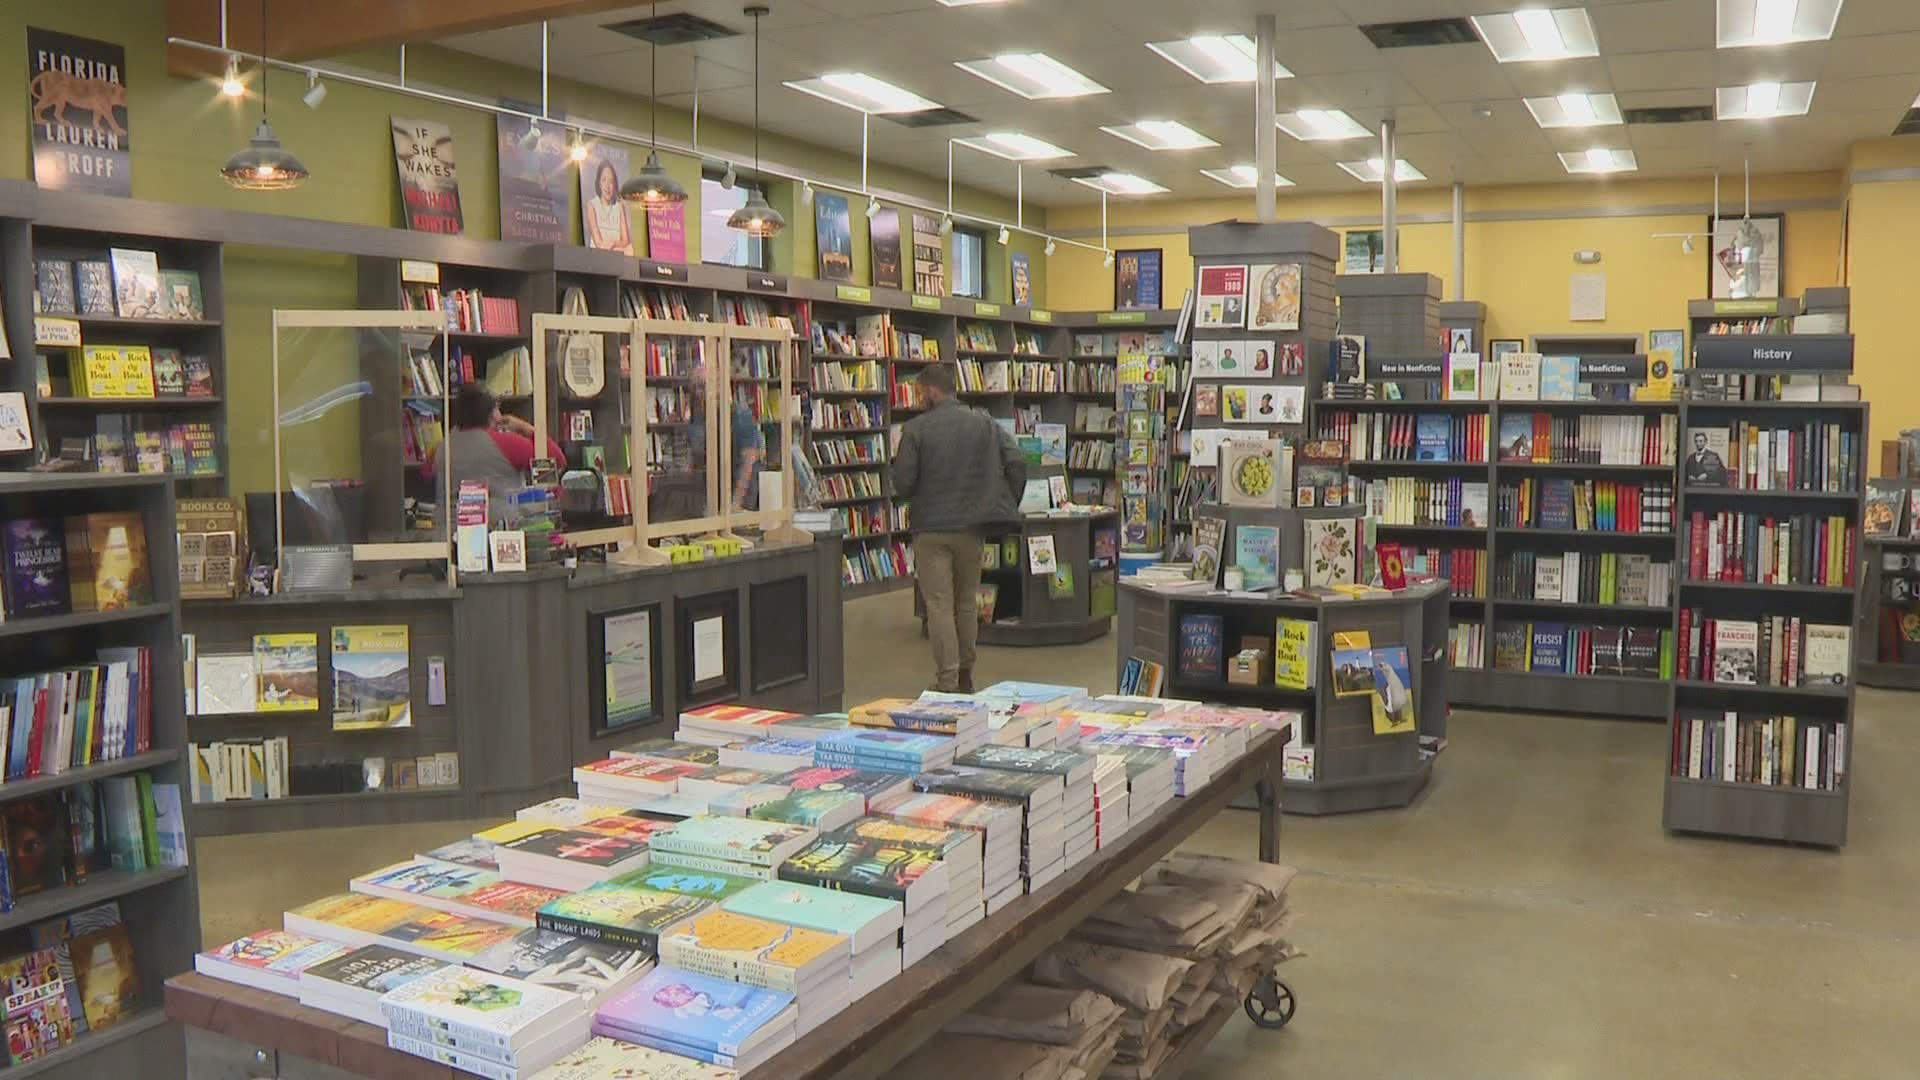 After 16 months of having their doors closed to the public, Print: A Bookstore is re-opening.